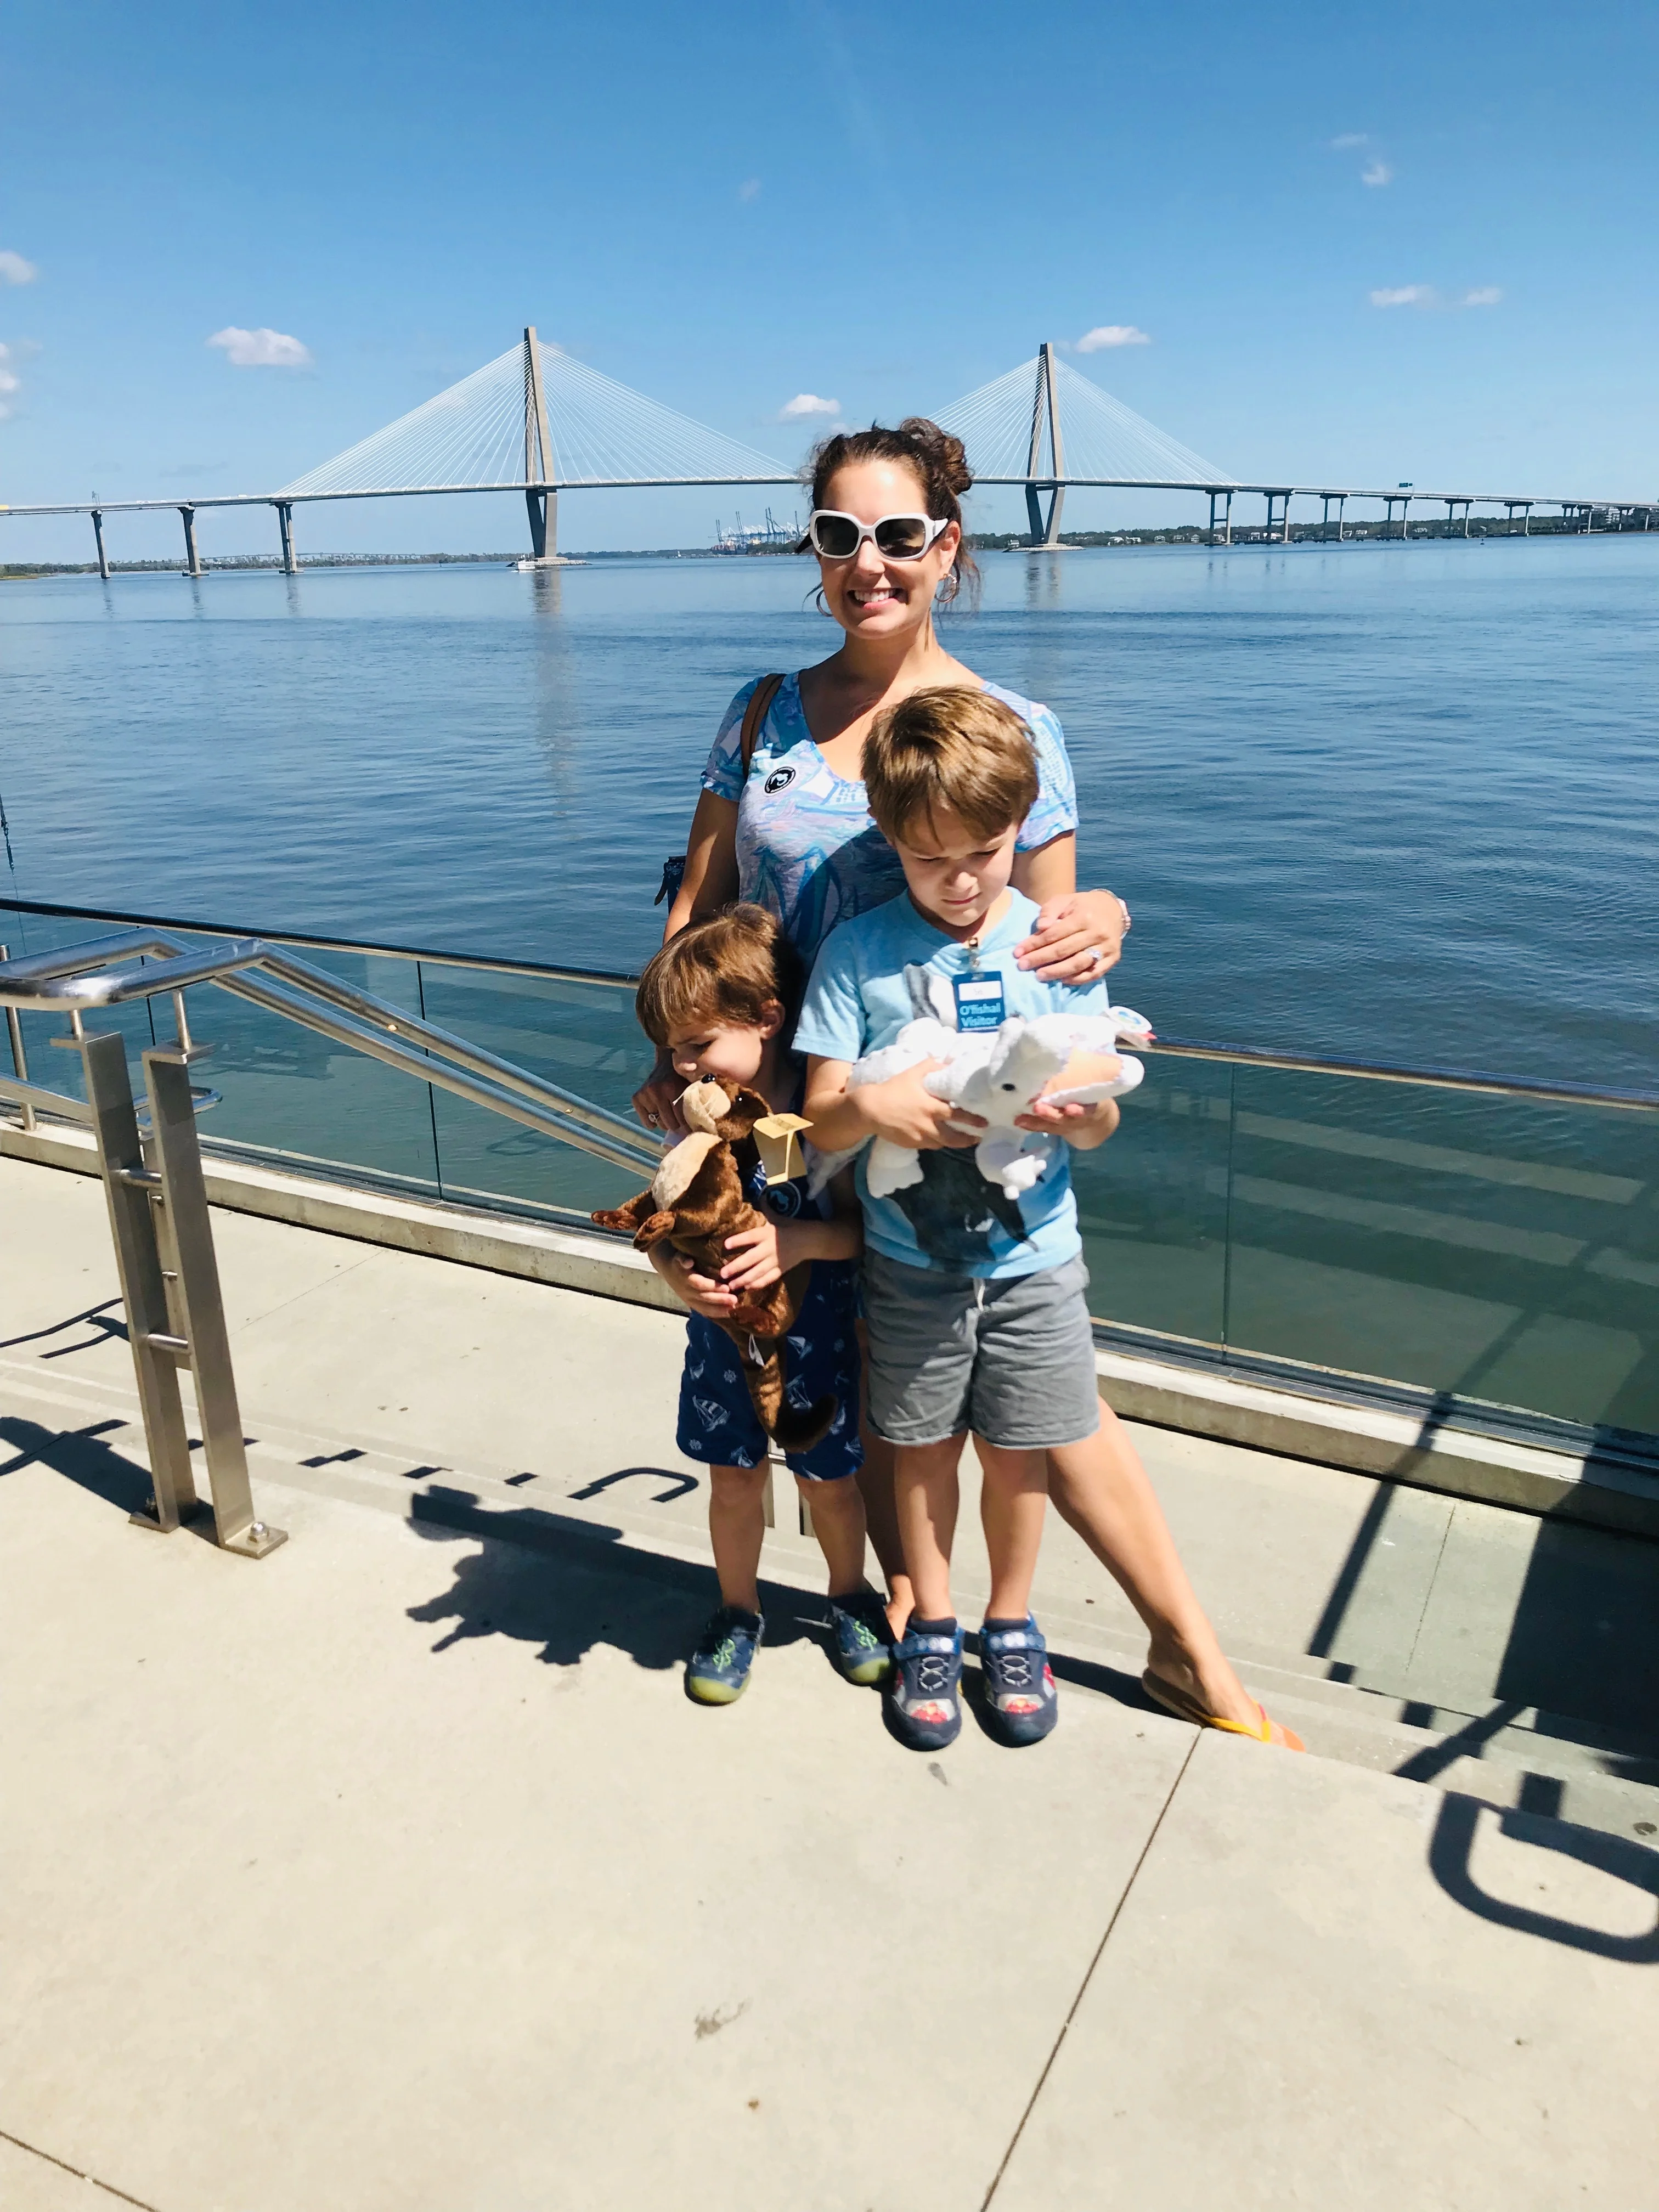 Charleston SC With Kids, Things To Do In Charleston With Kids